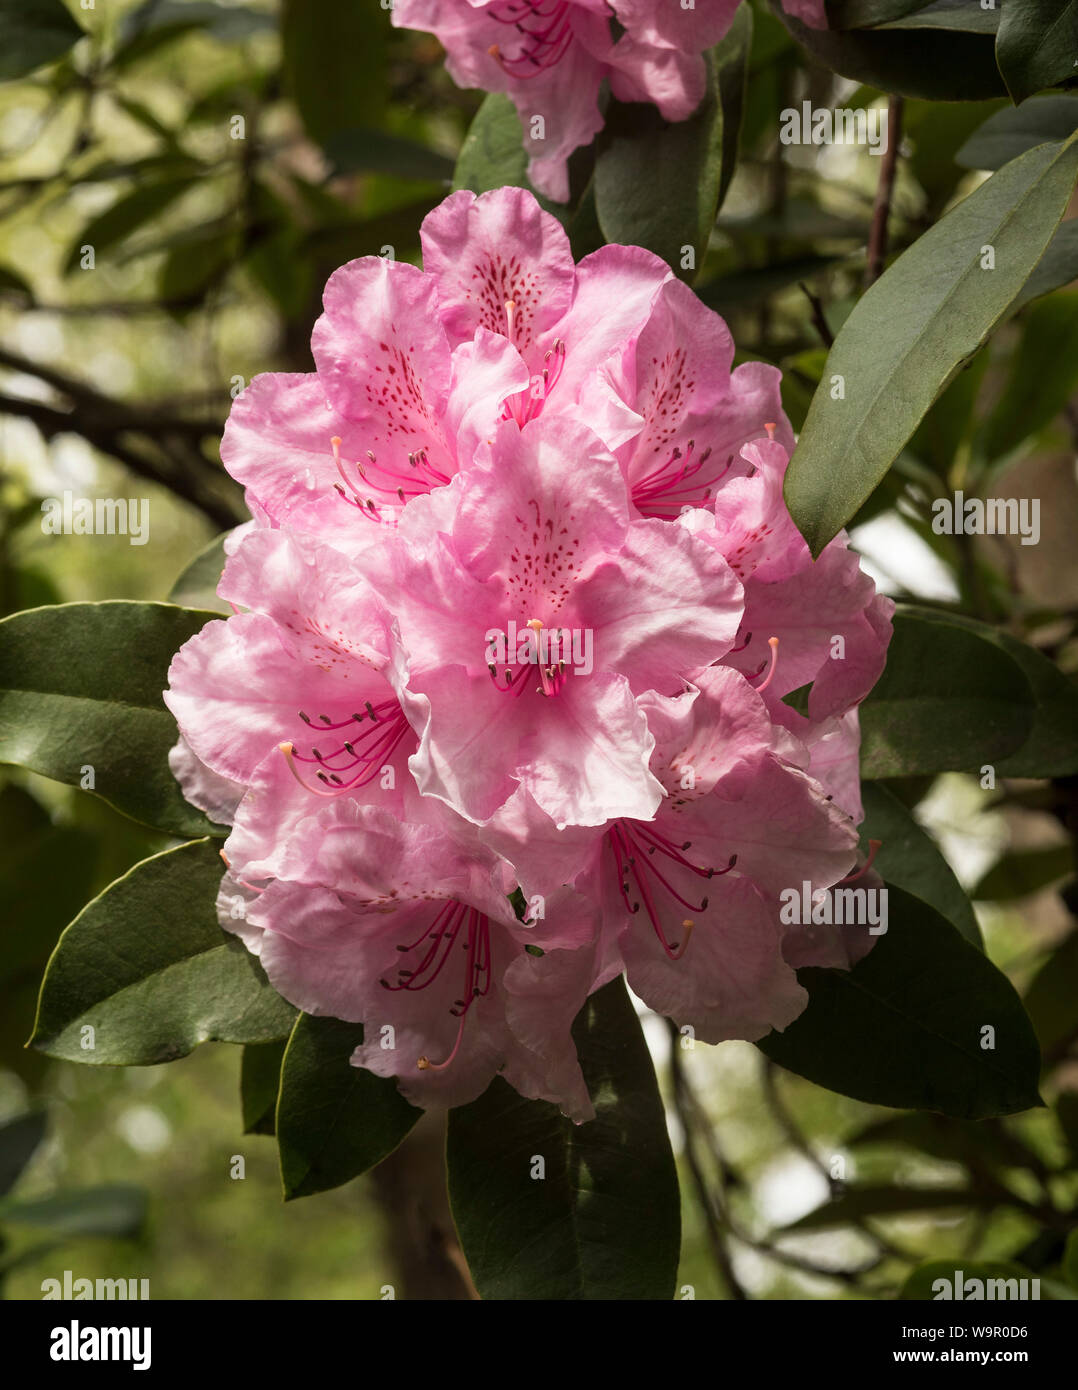 Pale pink rhododendrons with dark pink / burgundy spotted markings. Stock Photo